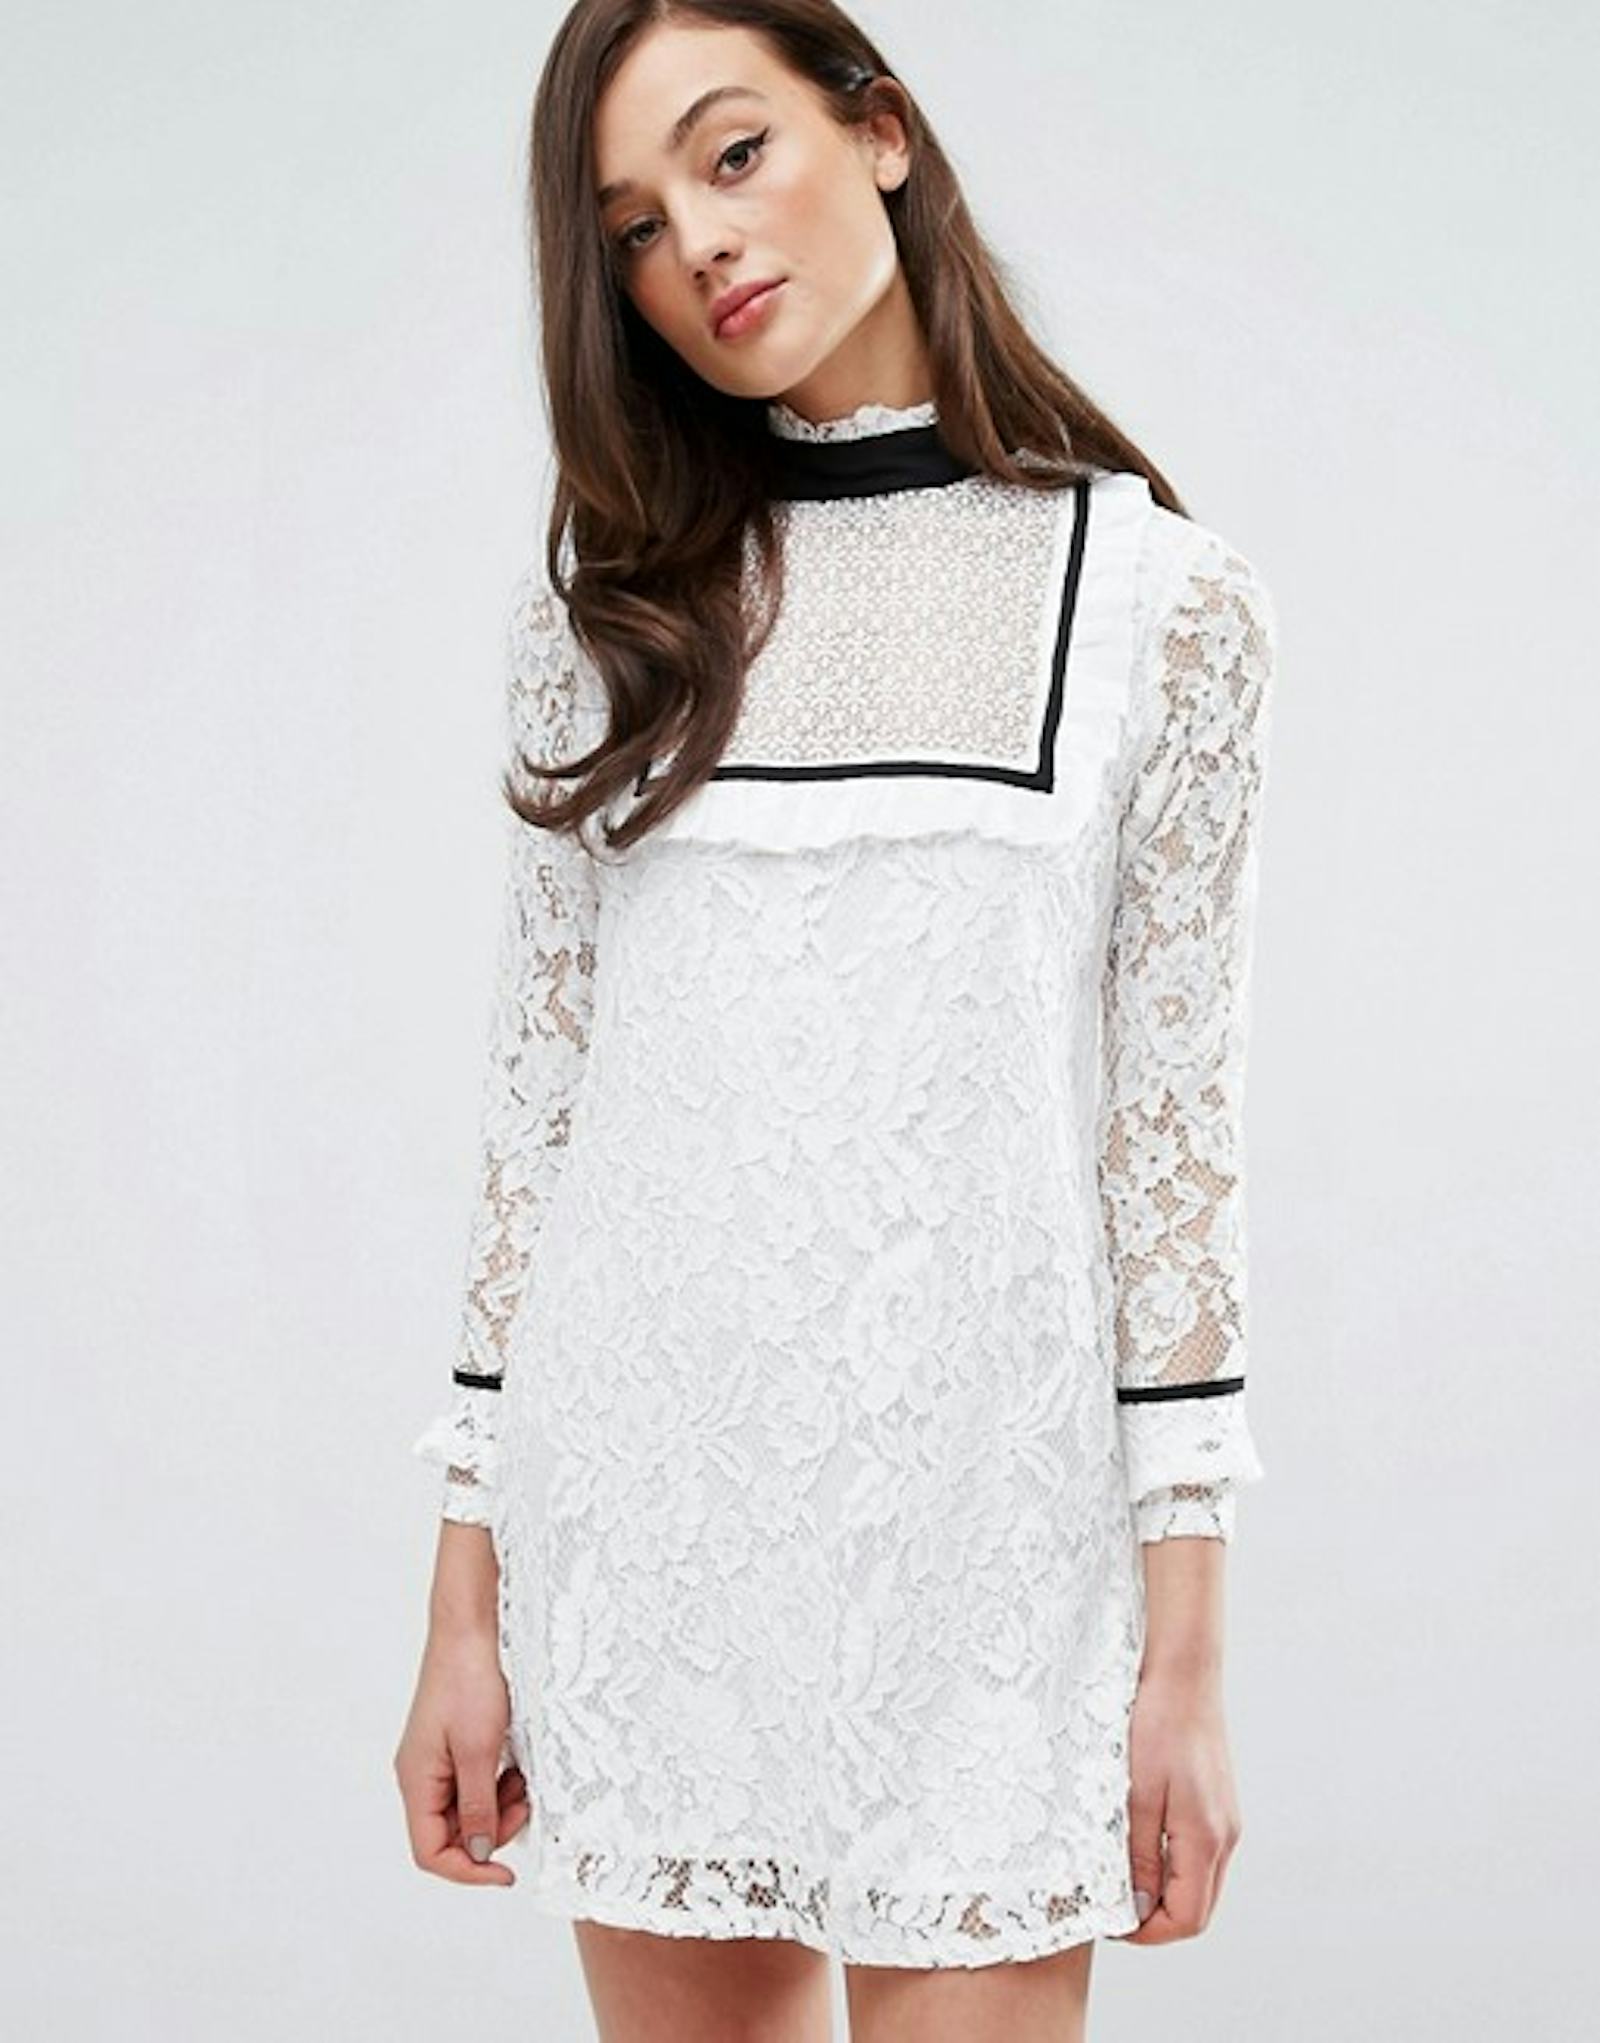 17 White Graduation Dresses That Are Anything But Boring